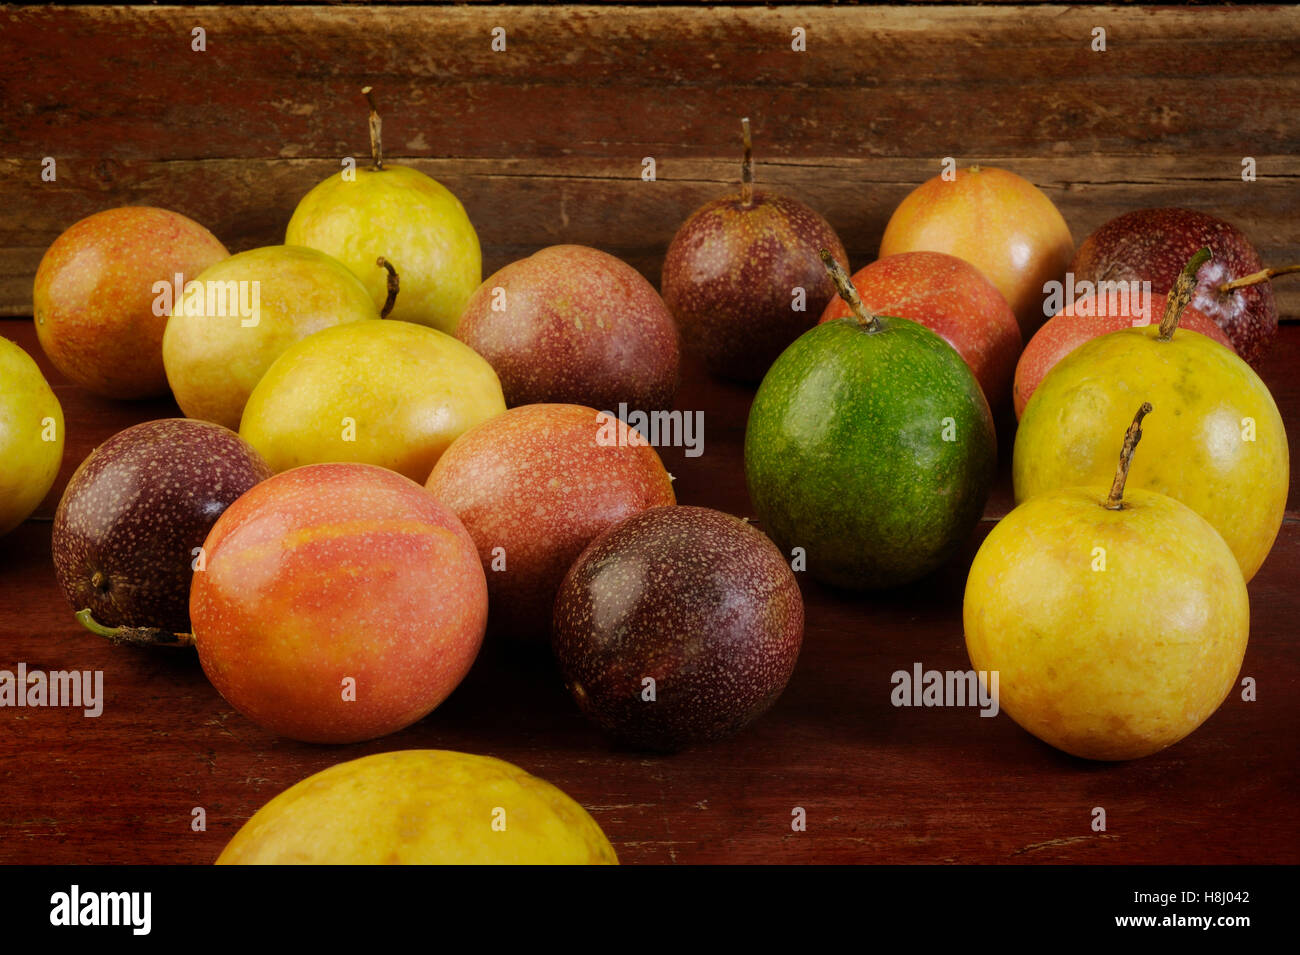 Passion fruits on wooden background Stock Photo